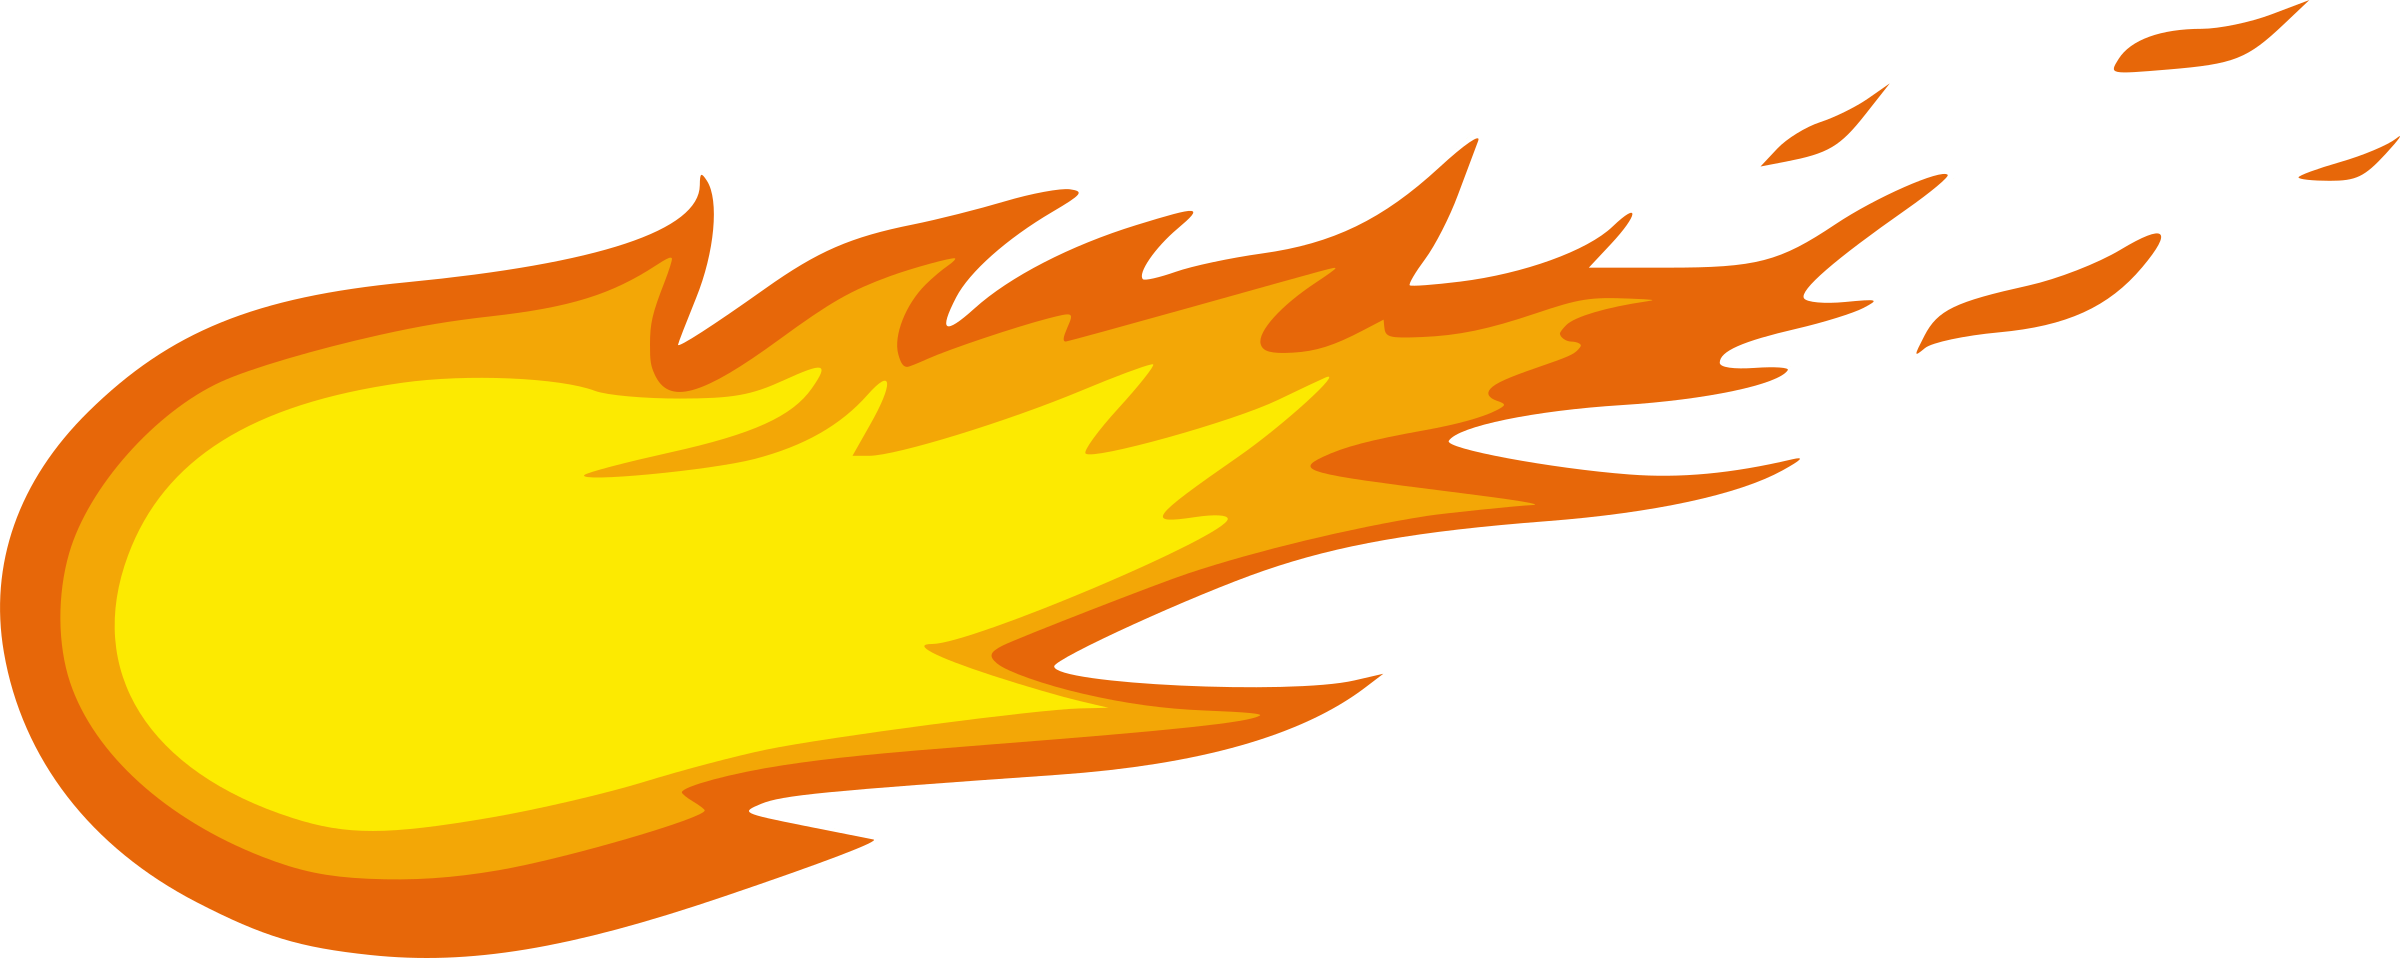 Fireball Free Clipart HQ PNG Image